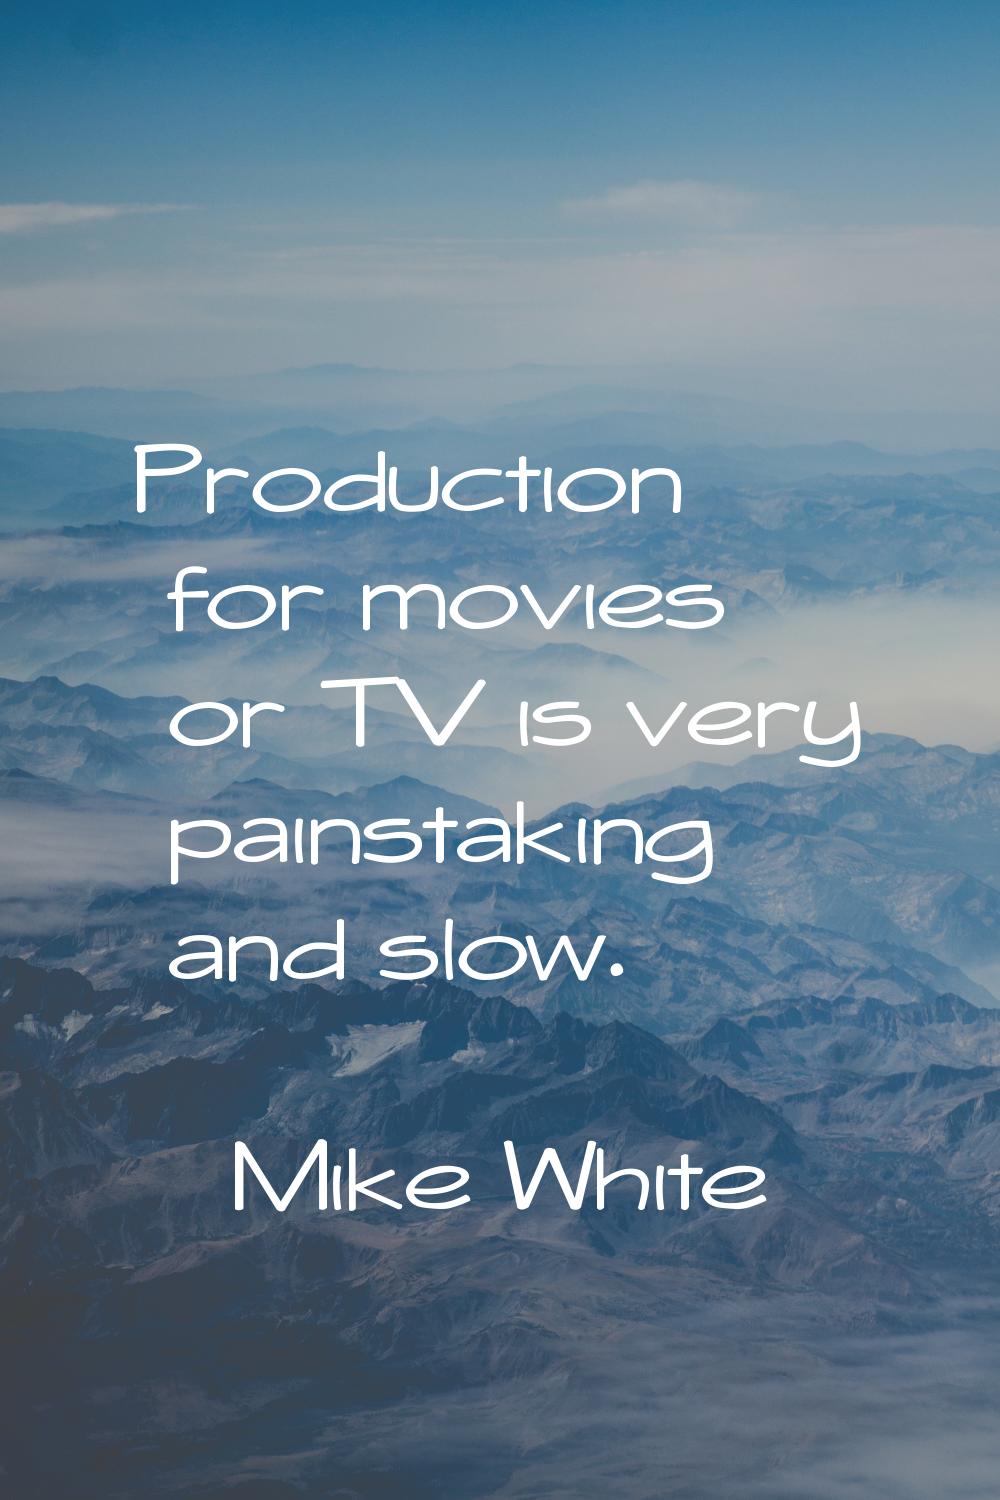 Production for movies or TV is very painstaking and slow.